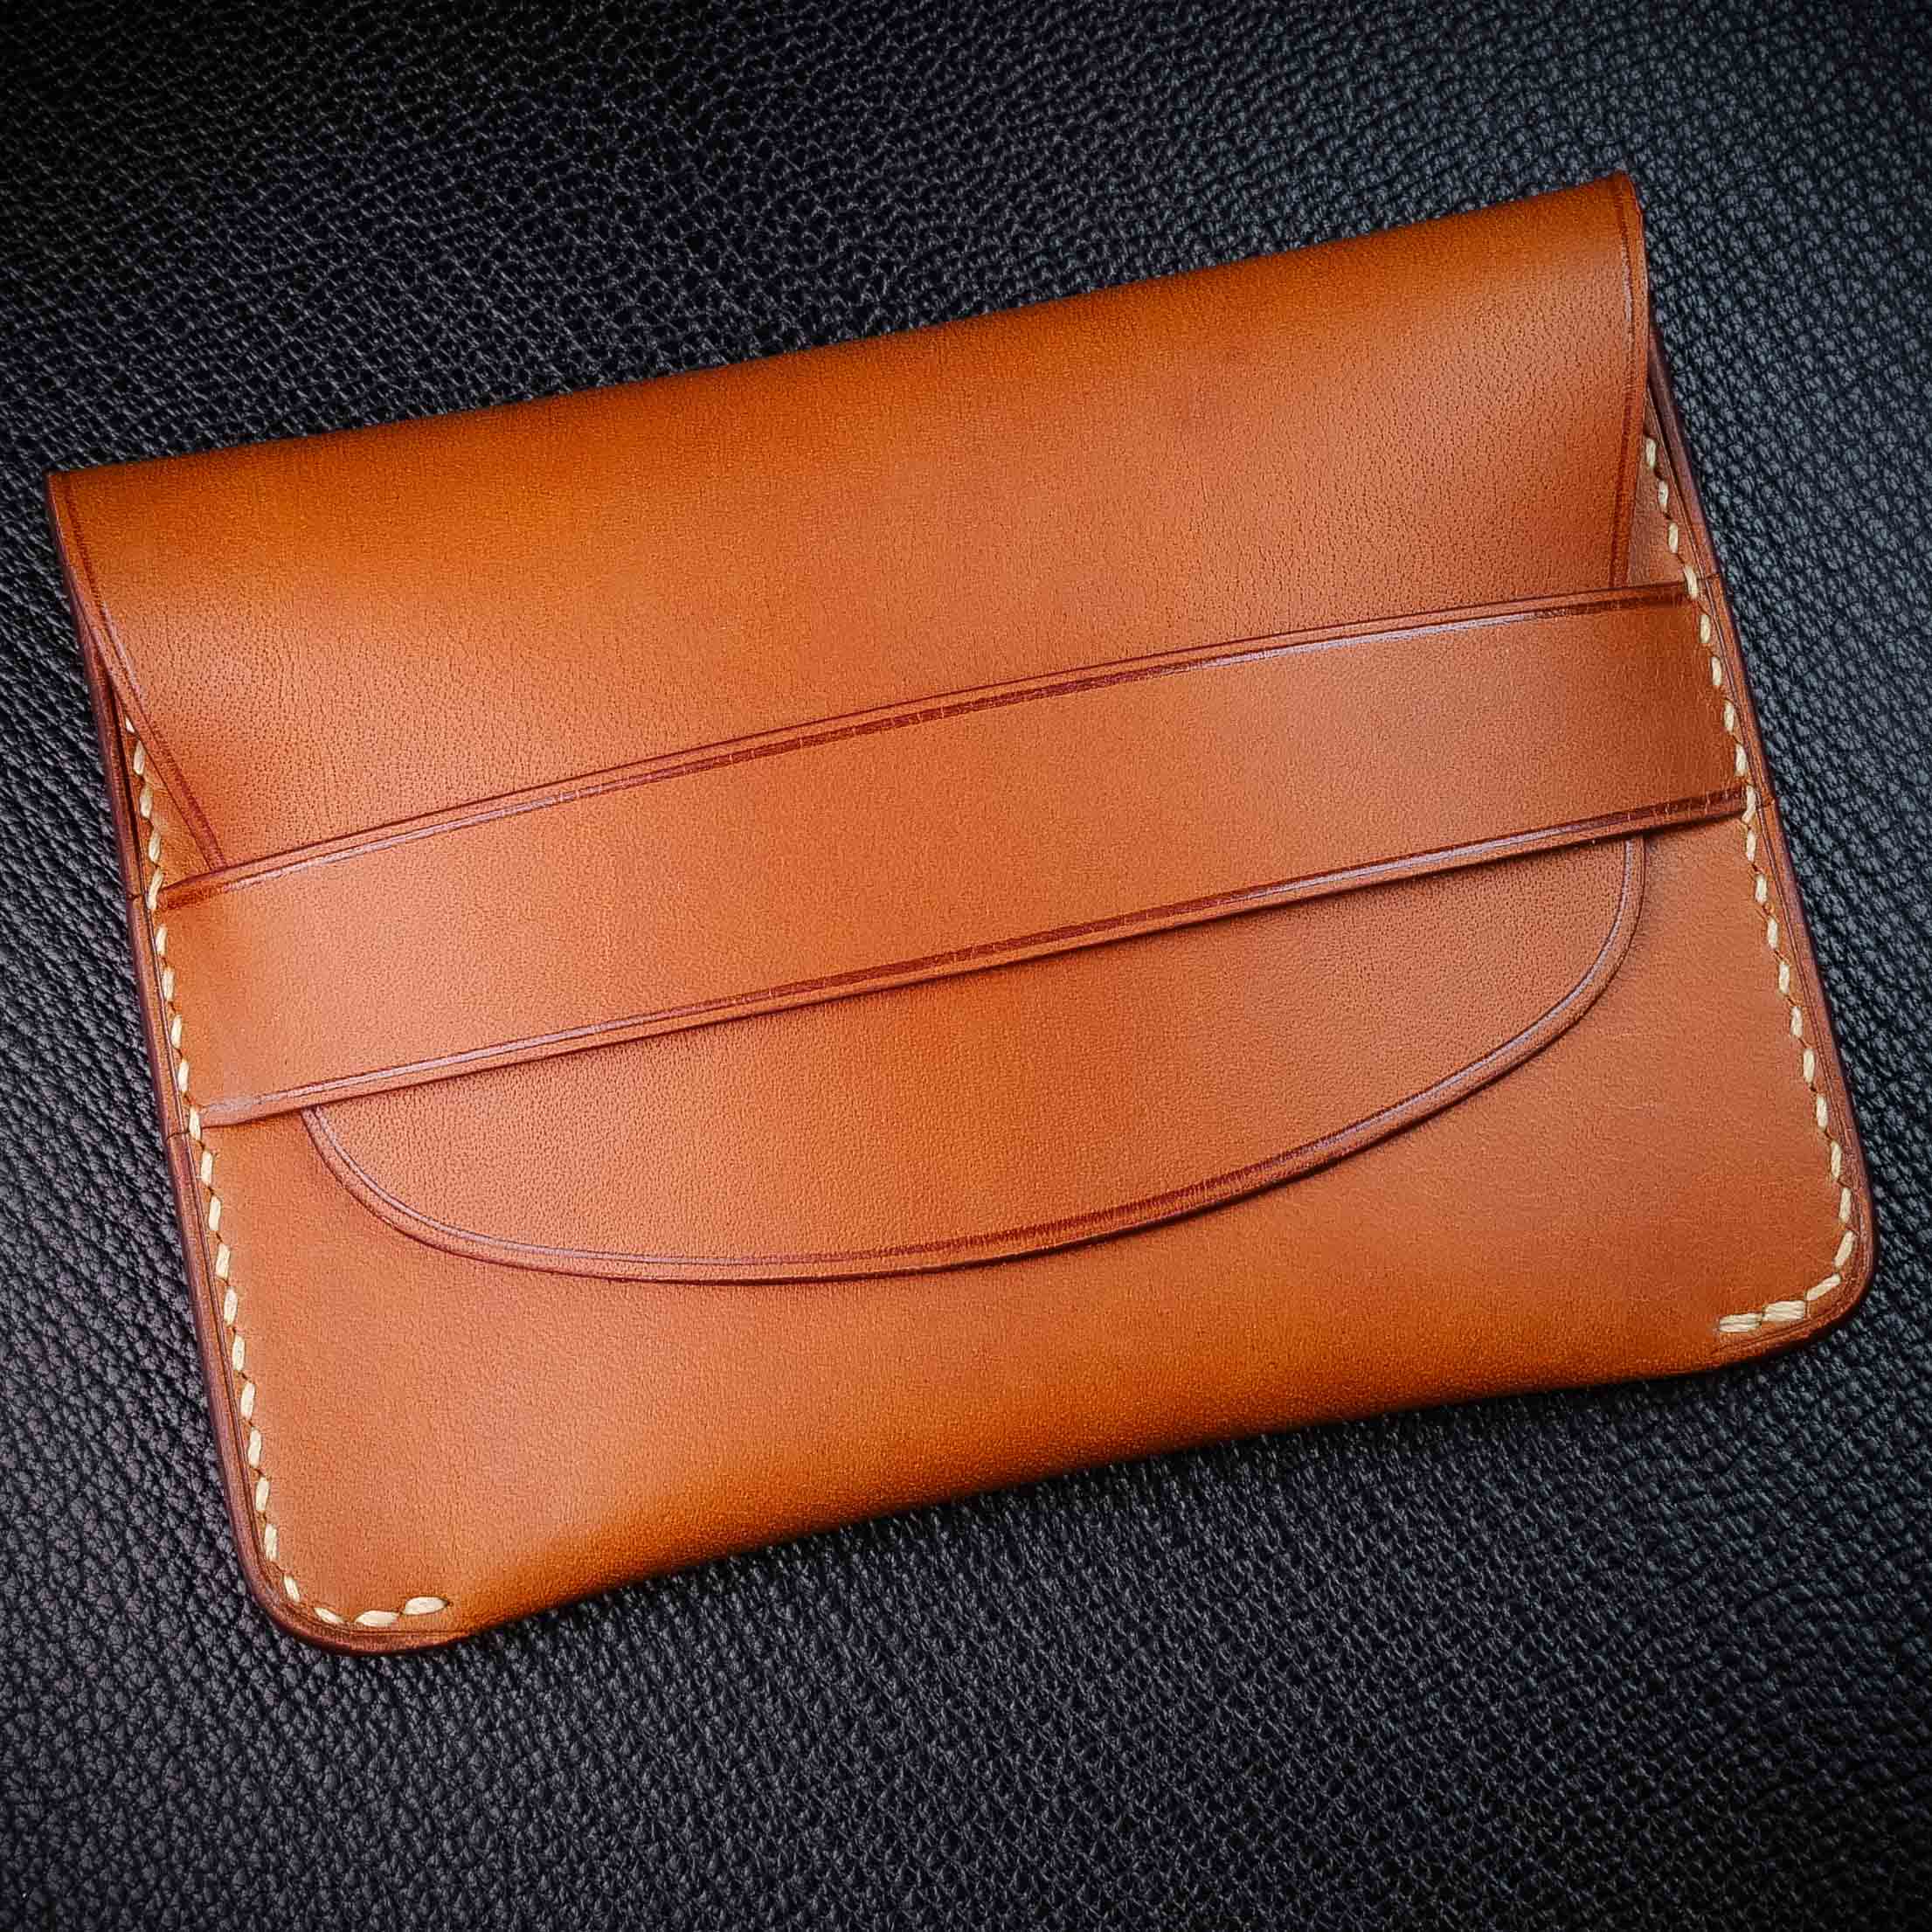 Hand Painted Leather Coin Purse Wallet Cardholder - #18